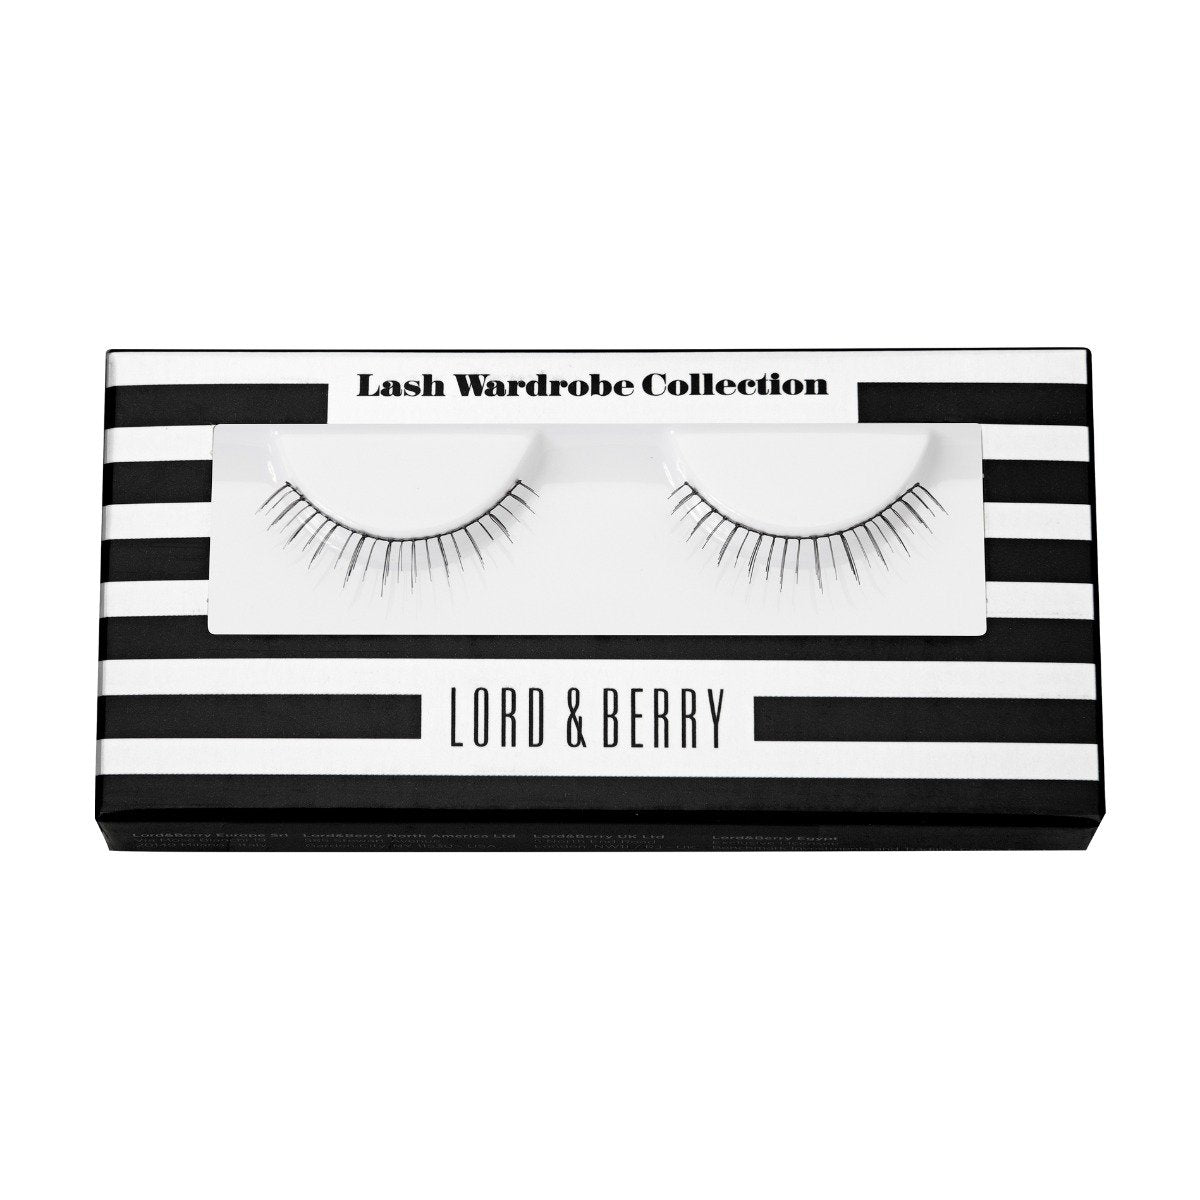 Lord & Berry Eyelashes Wardrobe Collection - EL25 - Bloom Pharmacy